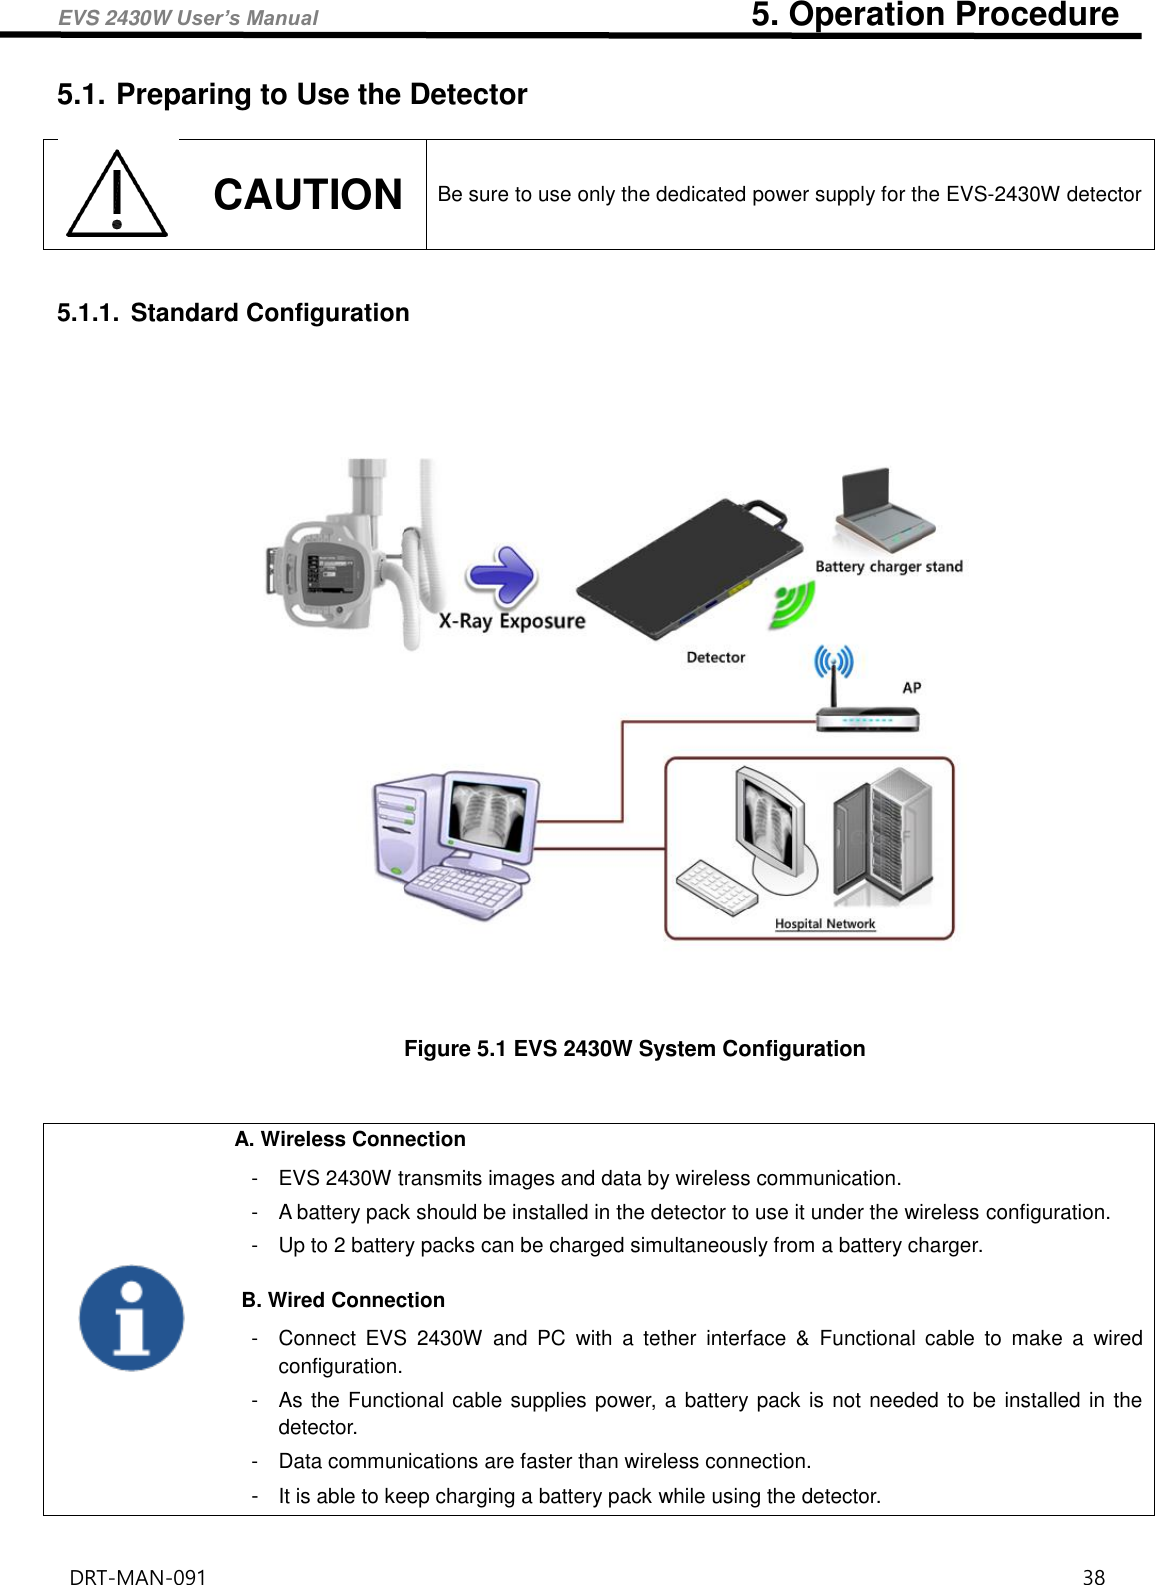 EVS 2430W User’s Manual                                                    5. Operation Procedure DRT-MAN-091                                                                                    38   5.1. Preparing to Use the Detector  CAUTION Be sure to use only the dedicated power supply for the EVS-2430W detector   5.1.1.  Standard Configuration      Figure 5.1 EVS 2430W System Configuration    A. Wireless Connection -  EVS 2430W transmits images and data by wireless communication.   -  A battery pack should be installed in the detector to use it under the wireless configuration.   -  Up to 2 battery packs can be charged simultaneously from a battery charger.    B. Wired Connection -  Connect  EVS  2430W  and  PC  with  a  tether  interface  &amp;  Functional  cable  to  make  a  wired configuration.   -  As the Functional cable supplies power, a battery pack is not needed to be installed in the detector. -  Data communications are faster than wireless connection.   -  It is able to keep charging a battery pack while using the detector.     